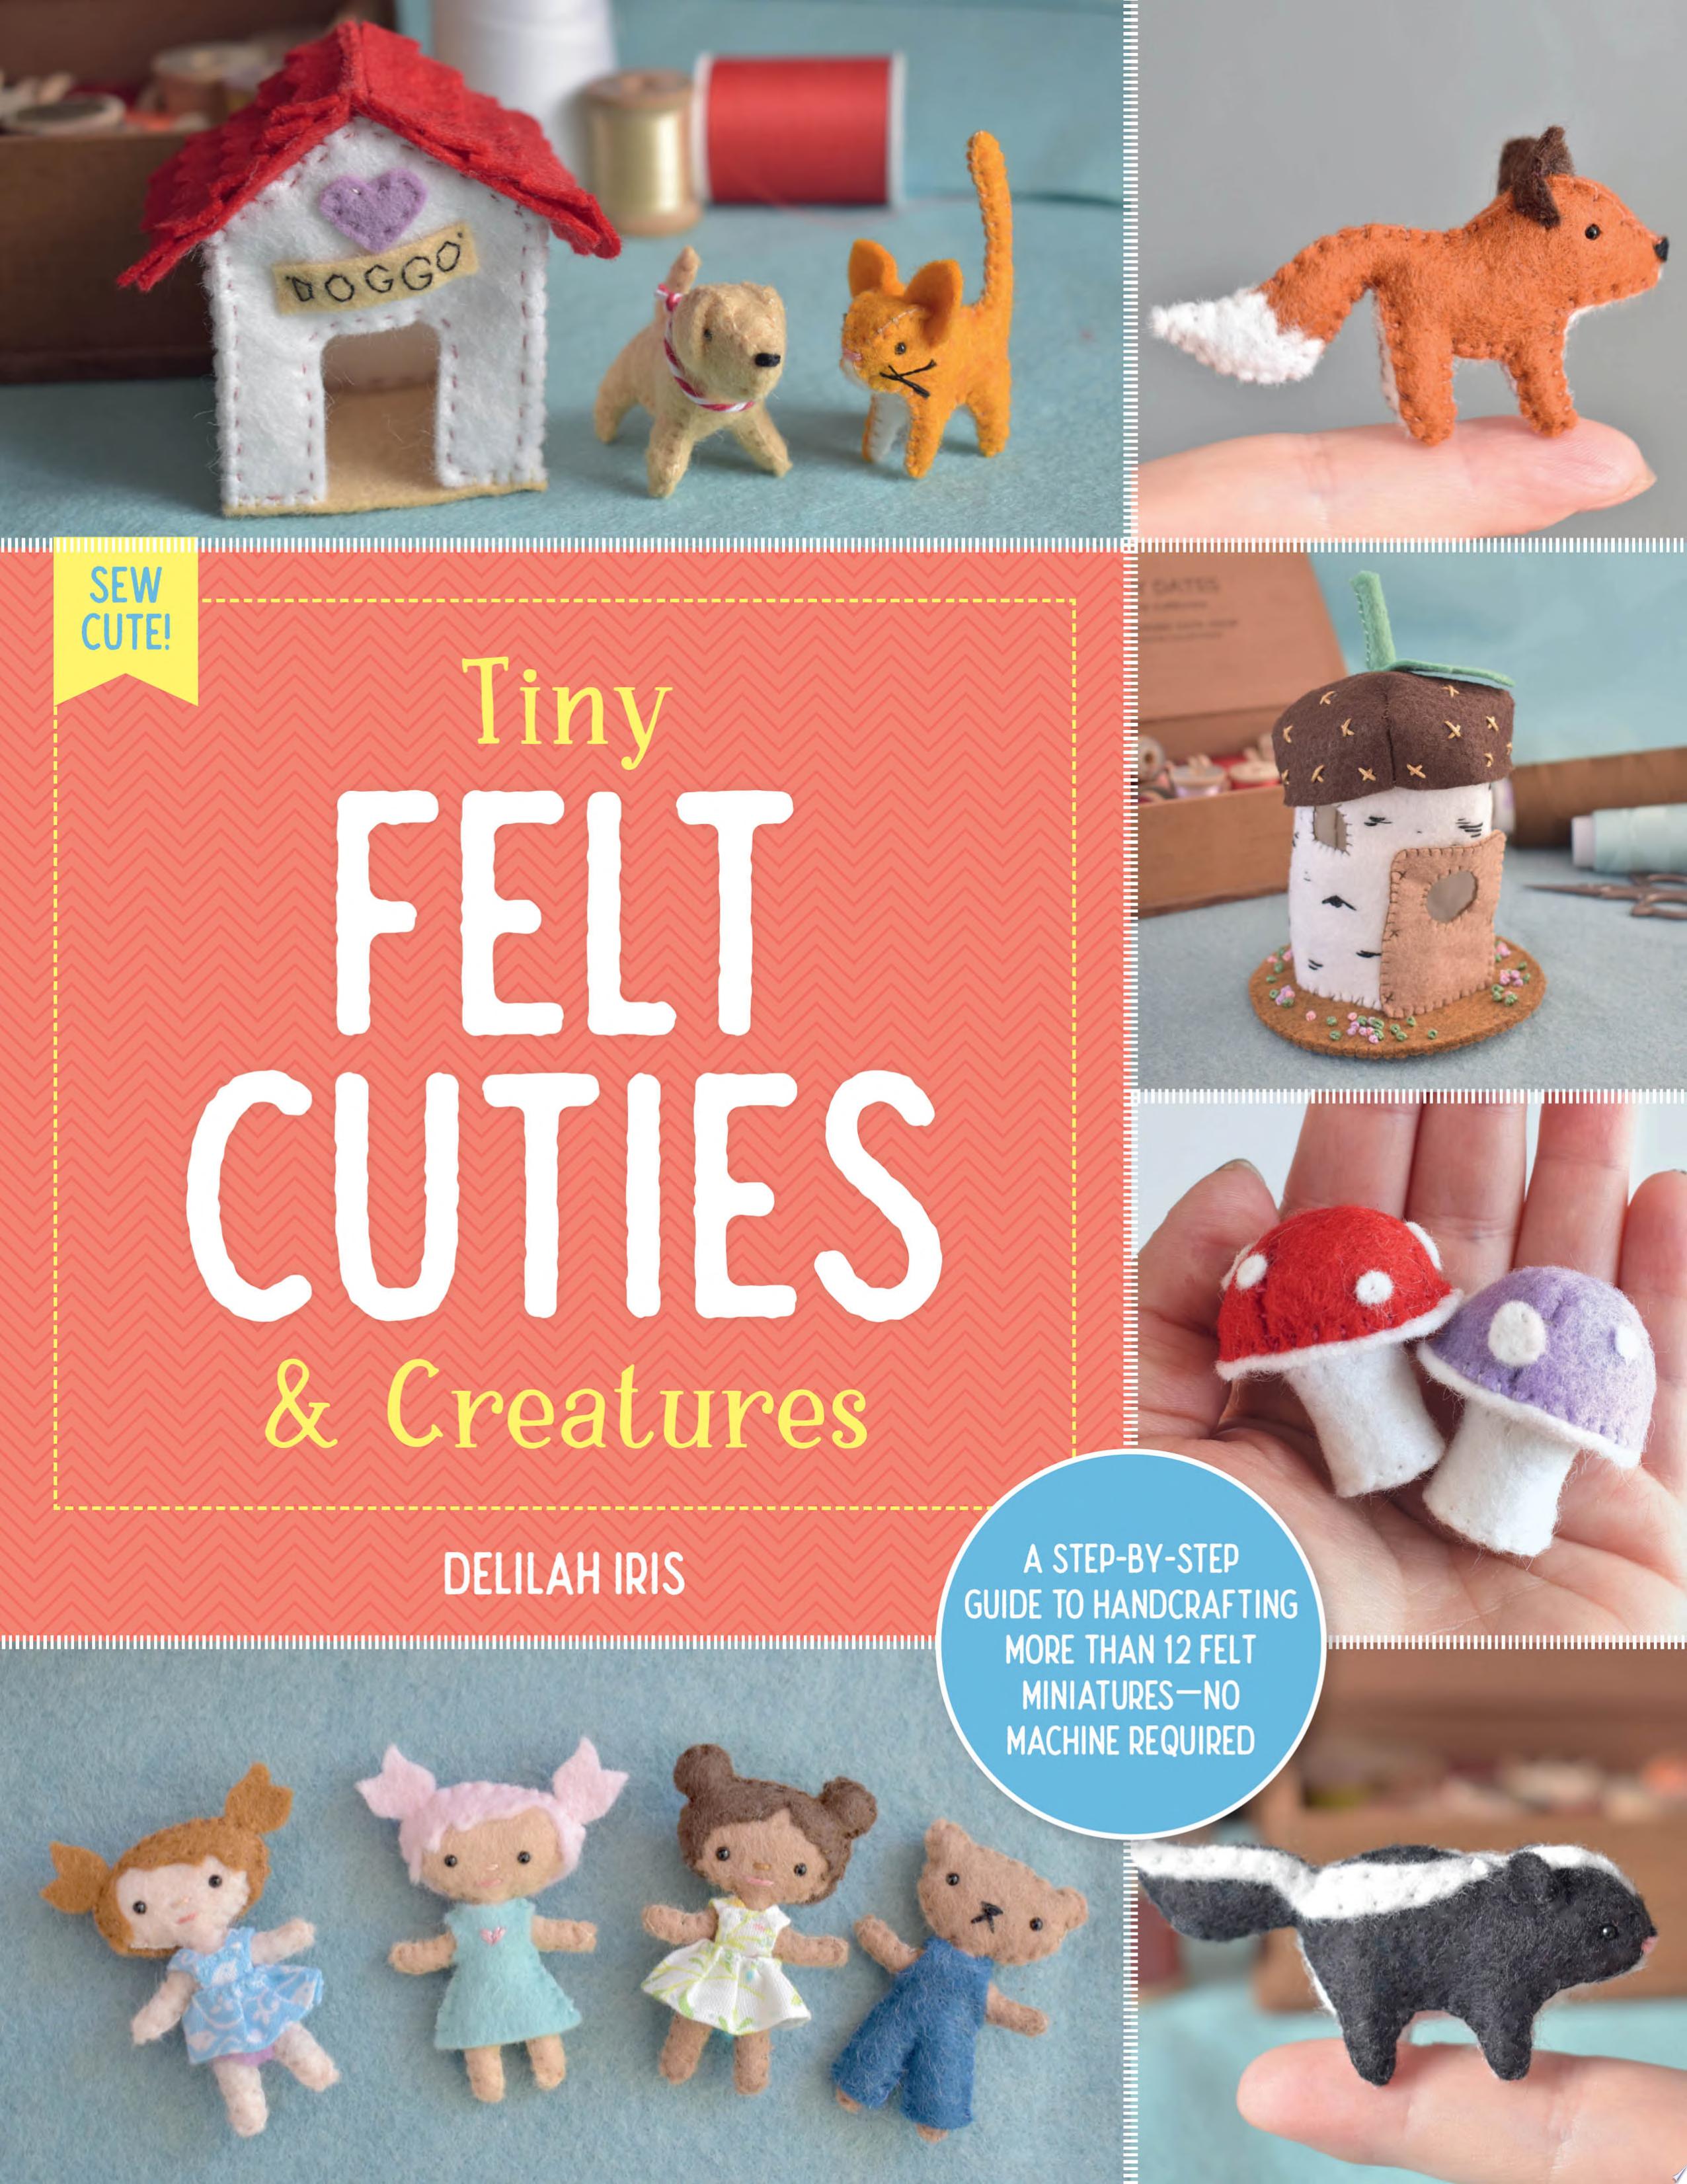 Image for "Tiny Felt Cuties &amp; Creatures"